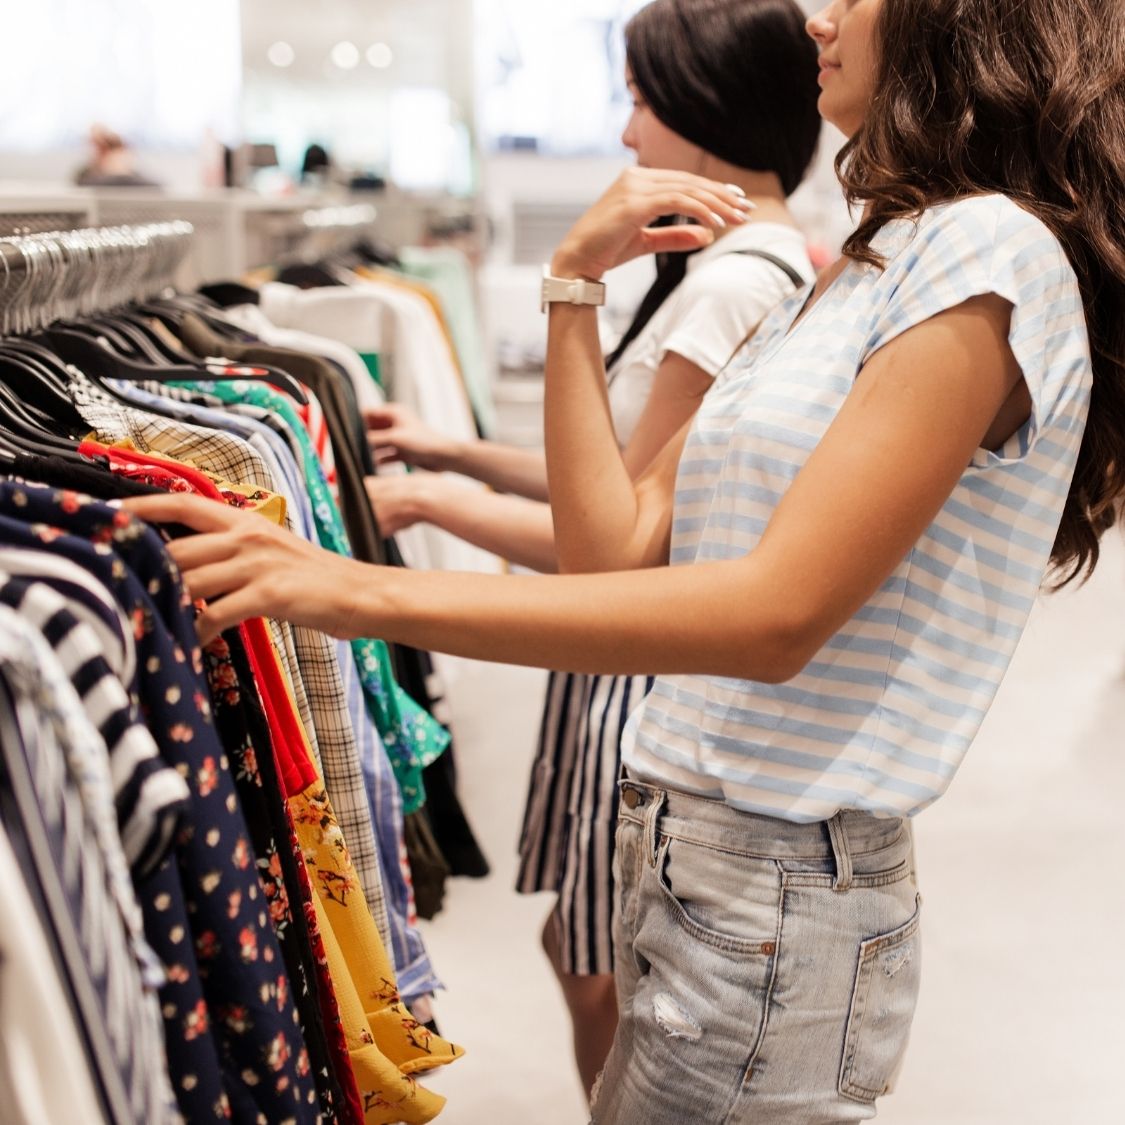 Top Tips for Saving Money on Your Clothes